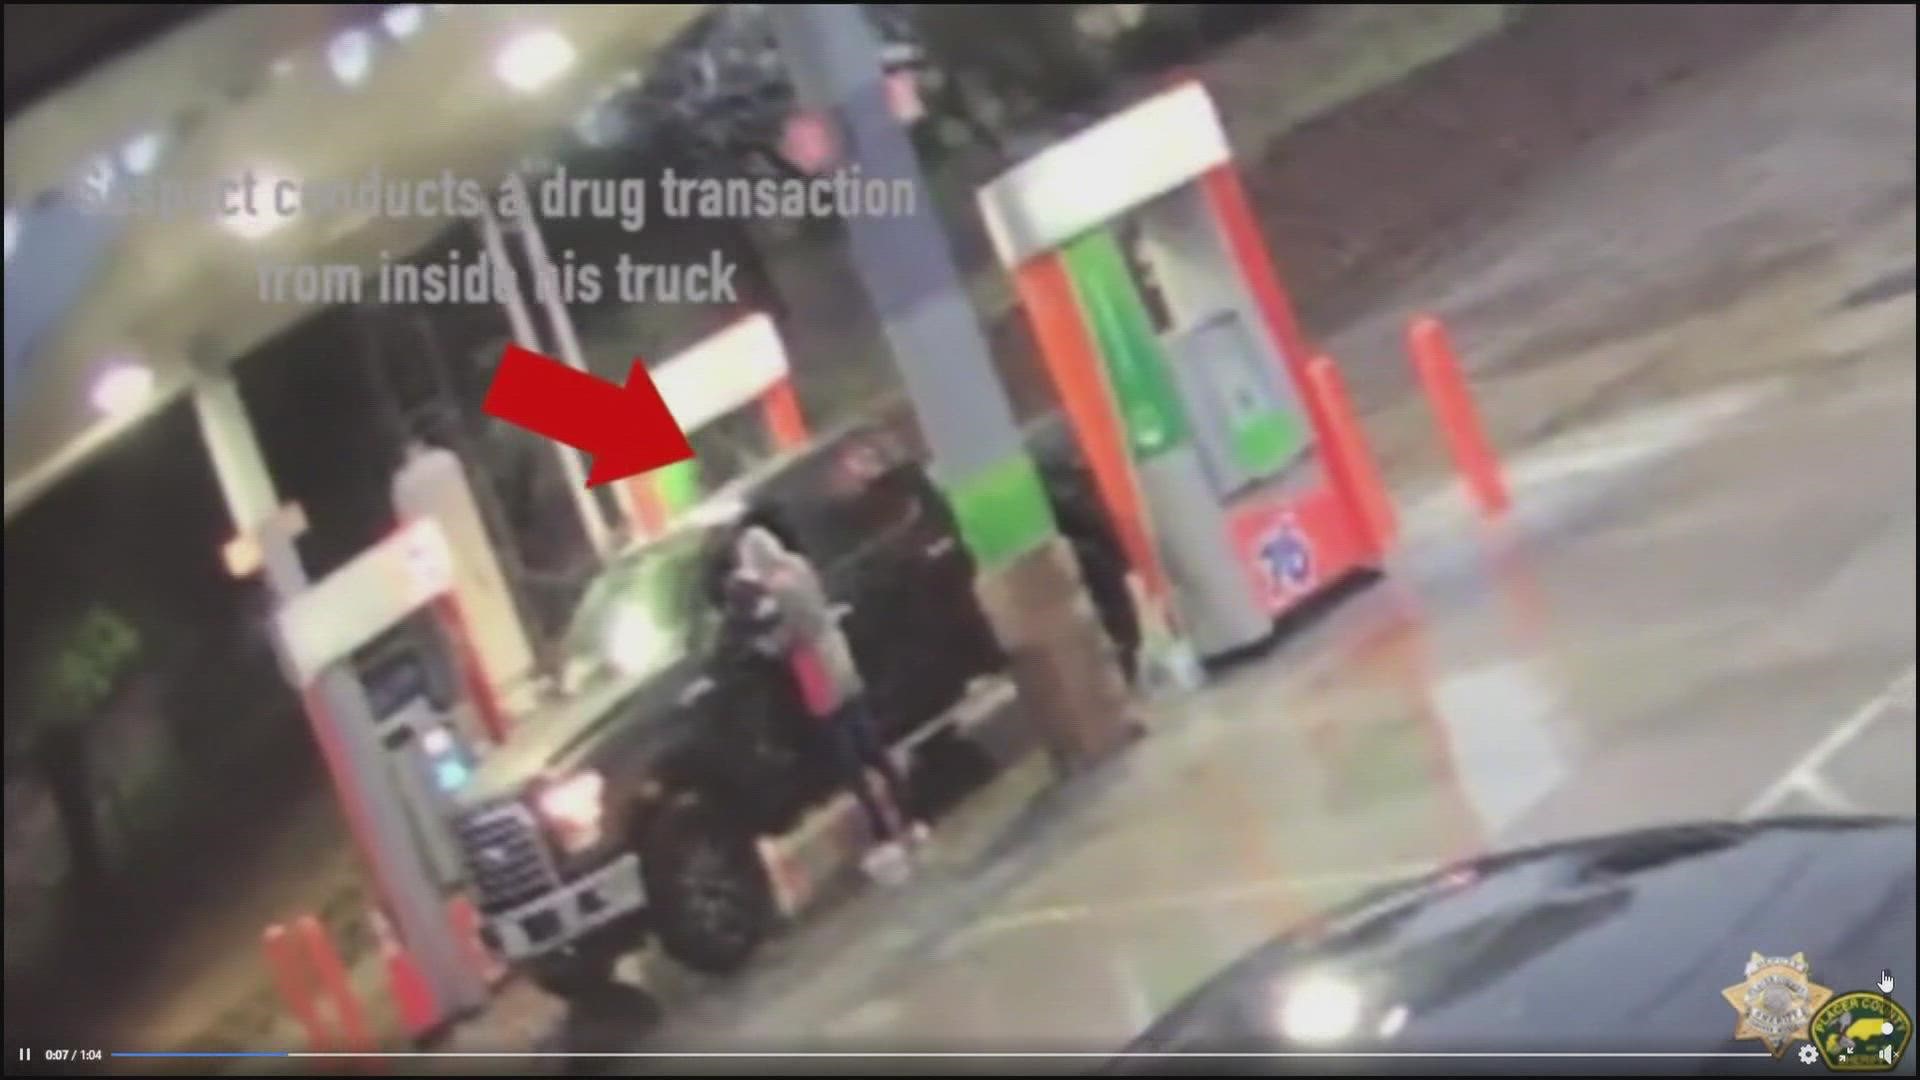 The video shows what appears to be a man purchasing fentanyl, taking it, walking into the gas station and then collapsing as he suffered a near fatal overdose.